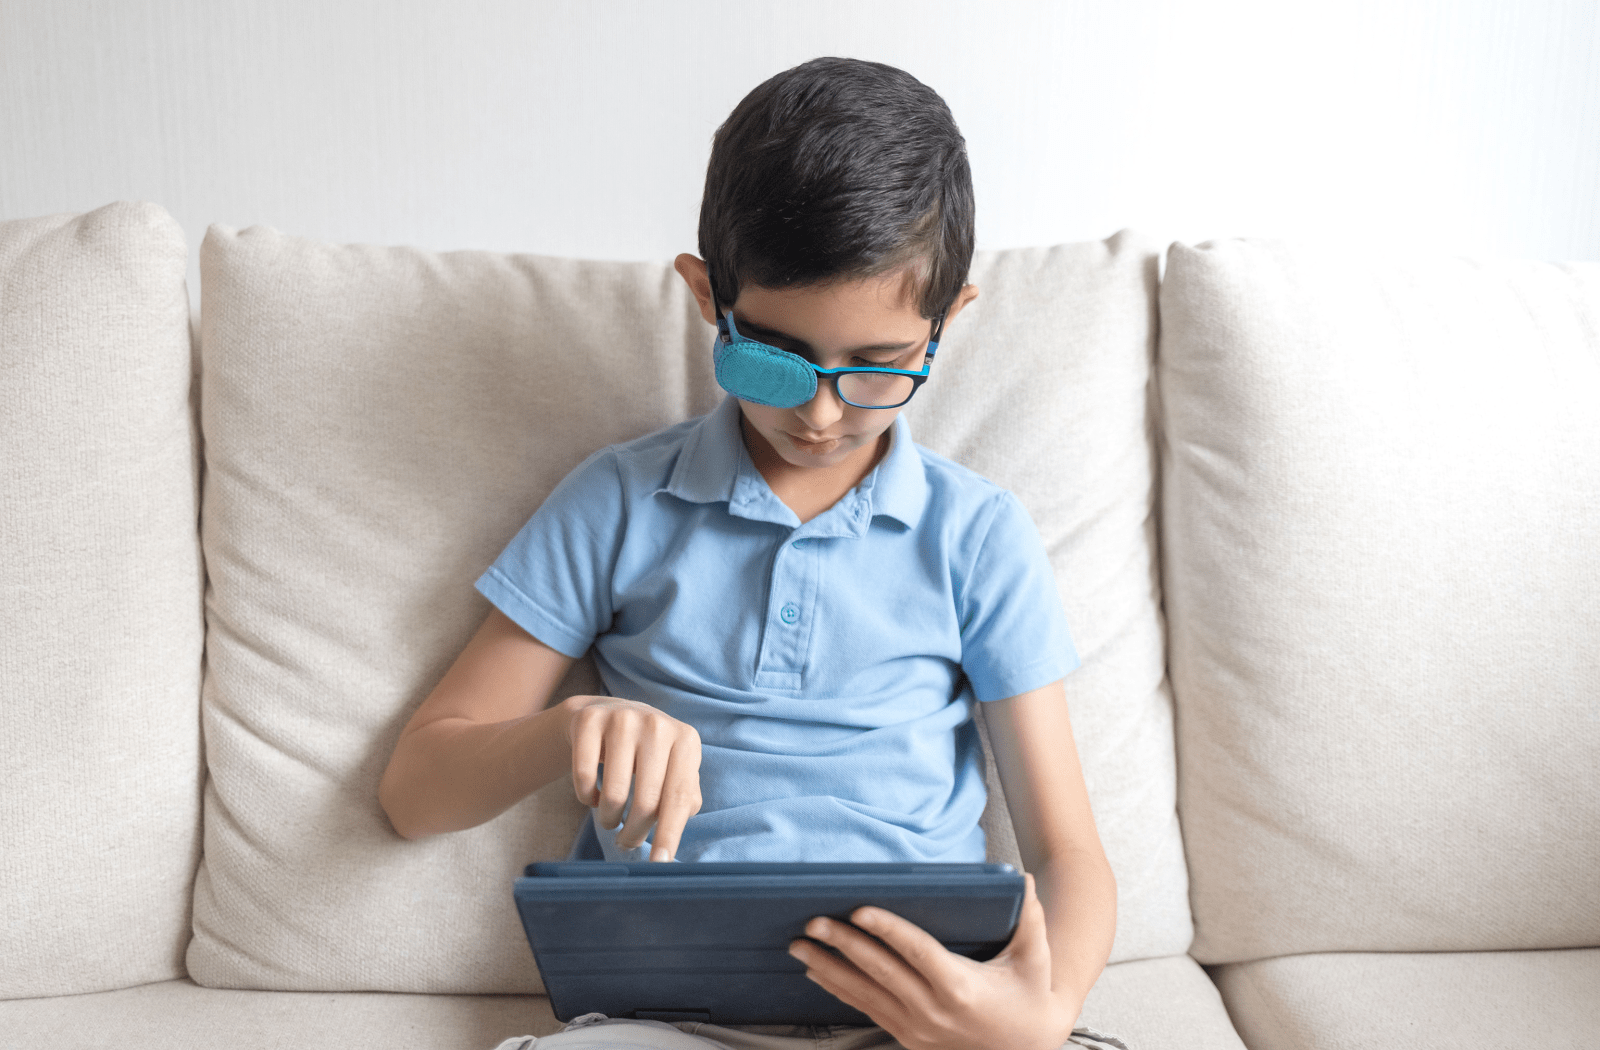 A boy wearing eyeglasses with a patch on the right lens while using his iPad